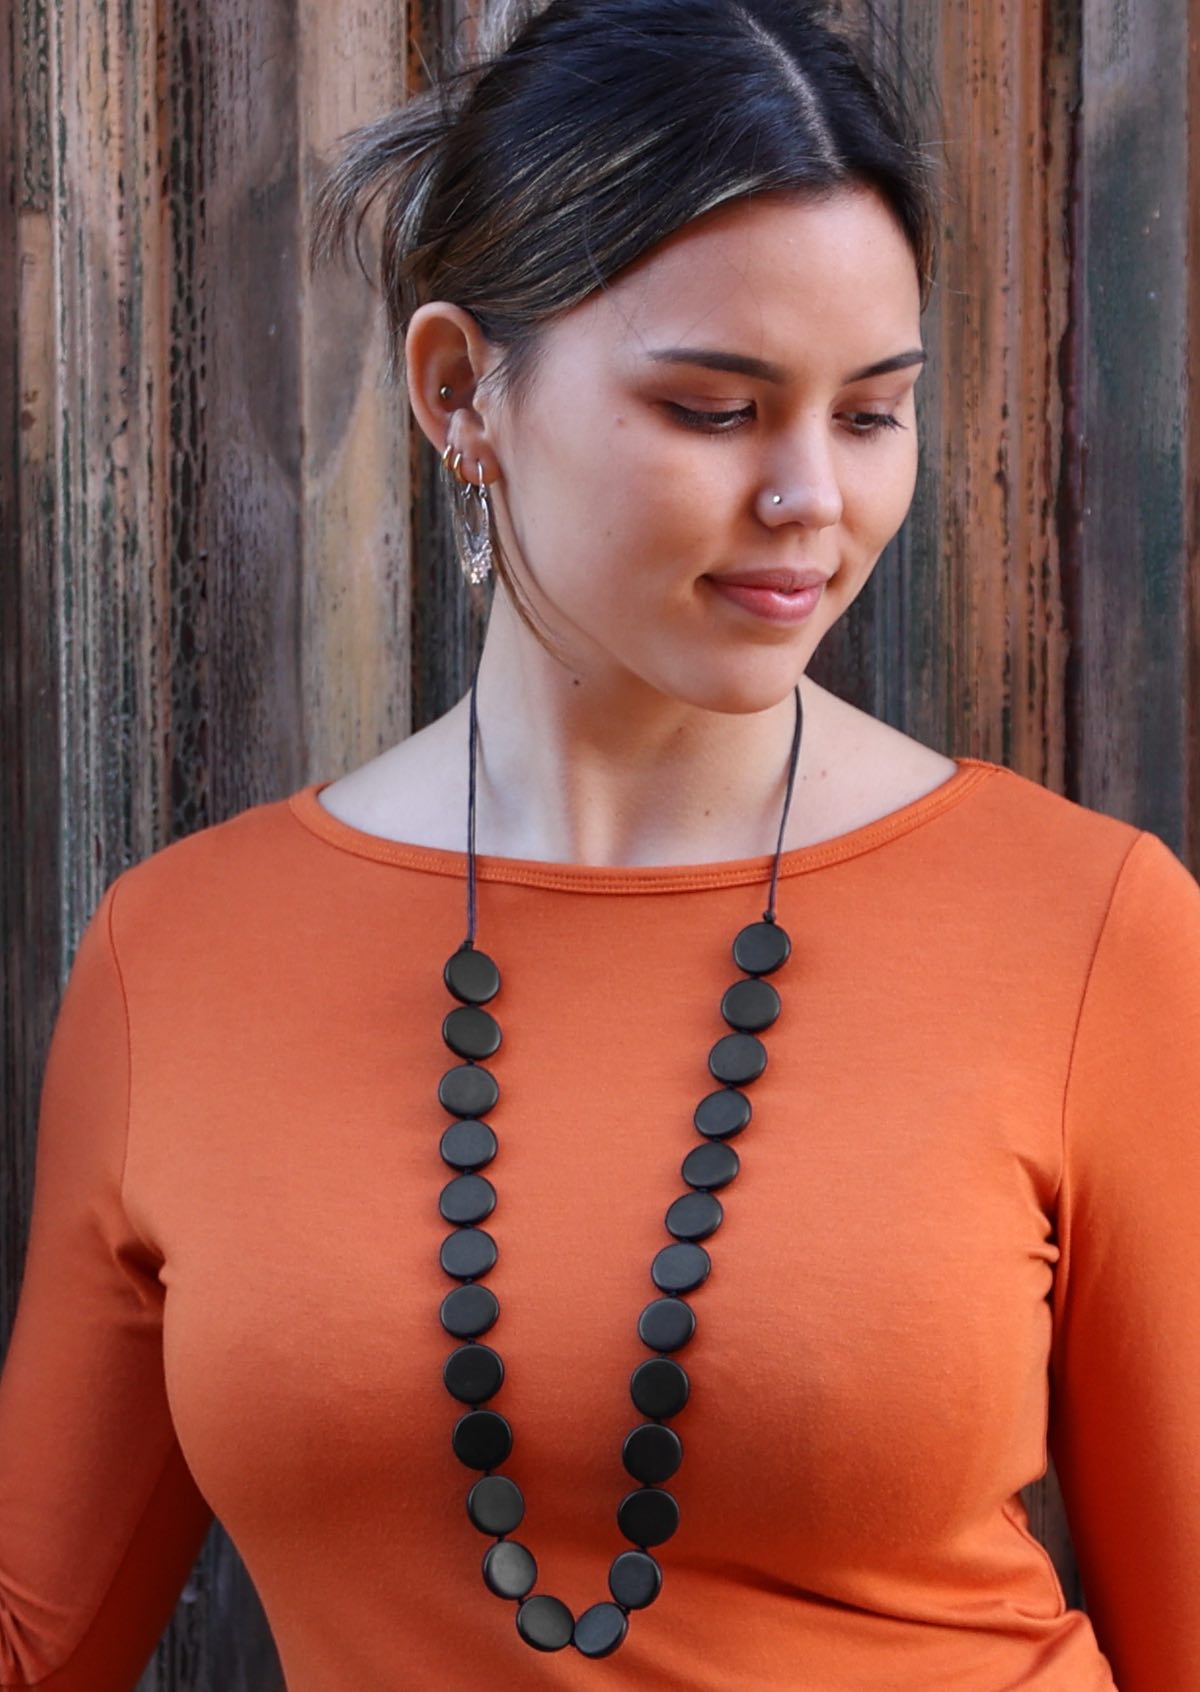 Women wears 90cm long fair trade necklace with hand sculpted wooden beads.